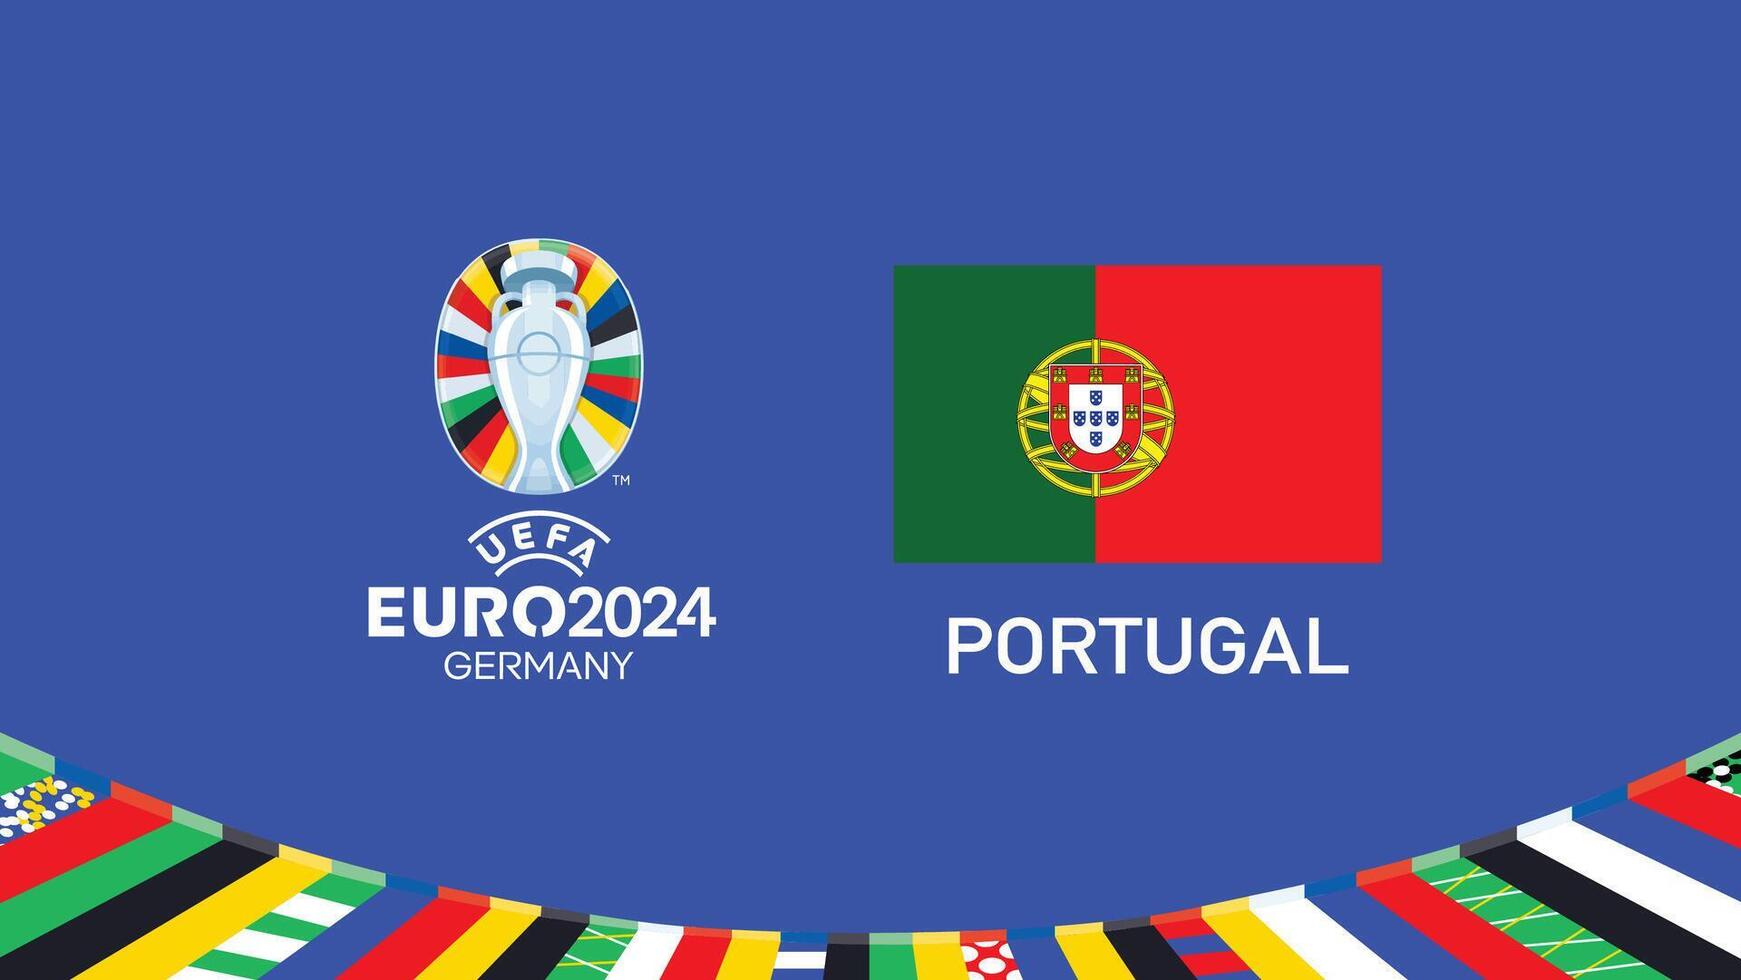 Euro 2024 Portugal Flag Emblem Teams Design With Official Symbol Logo Abstract Countries European Football Illustration vector